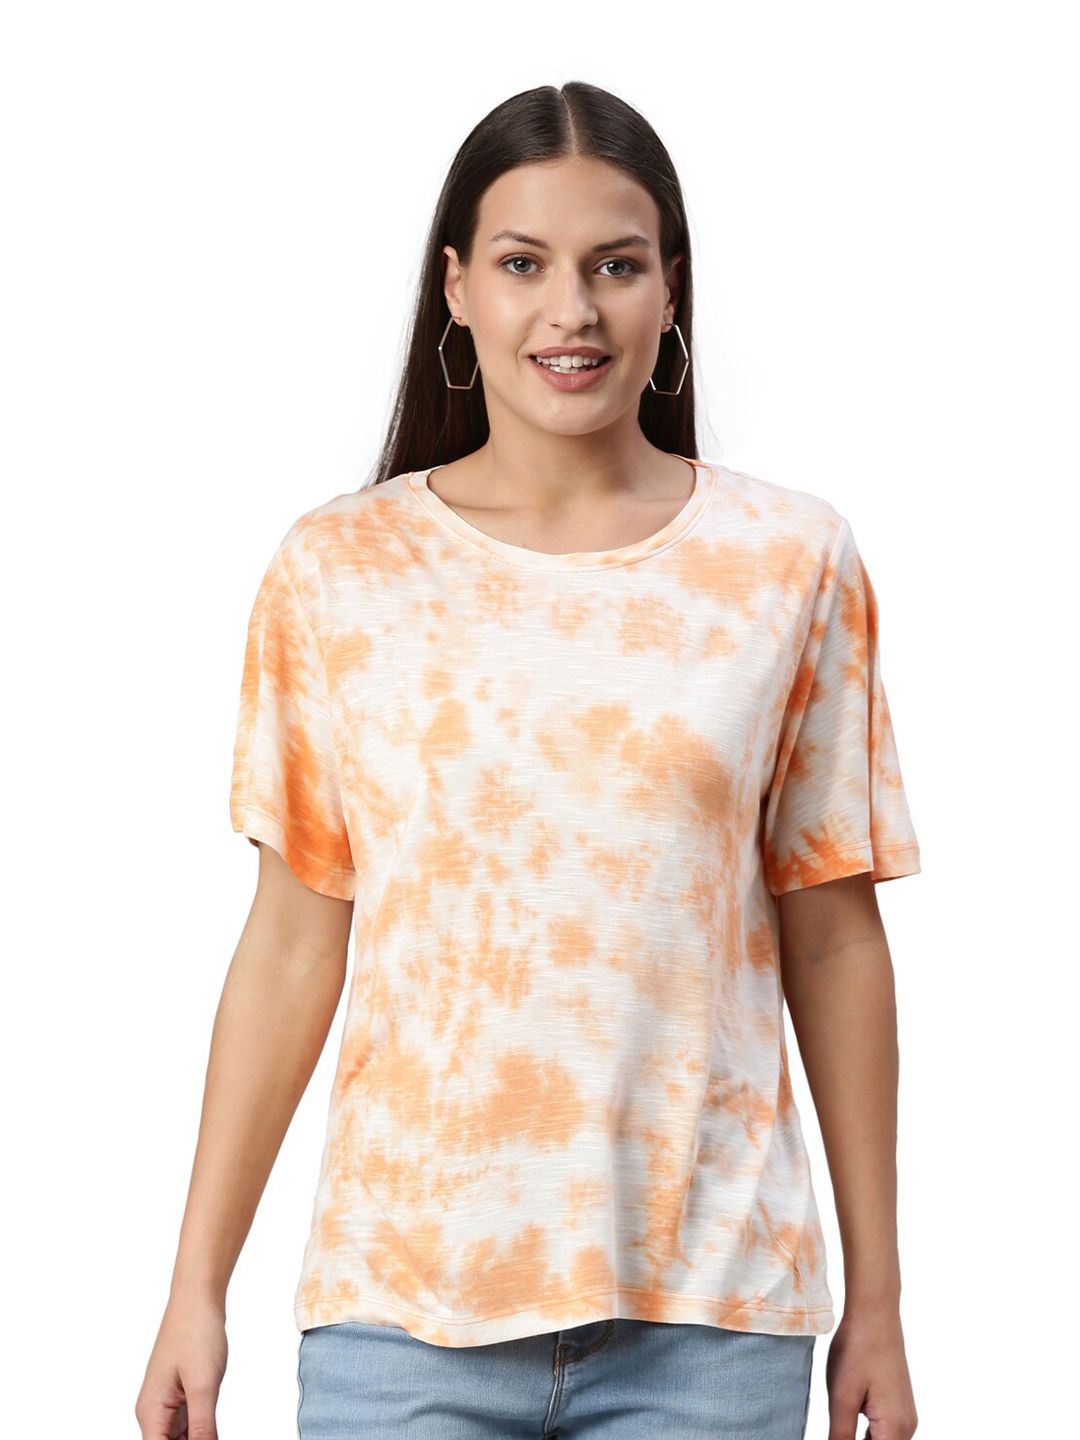 YCANF Tie and Dye Top Price in India